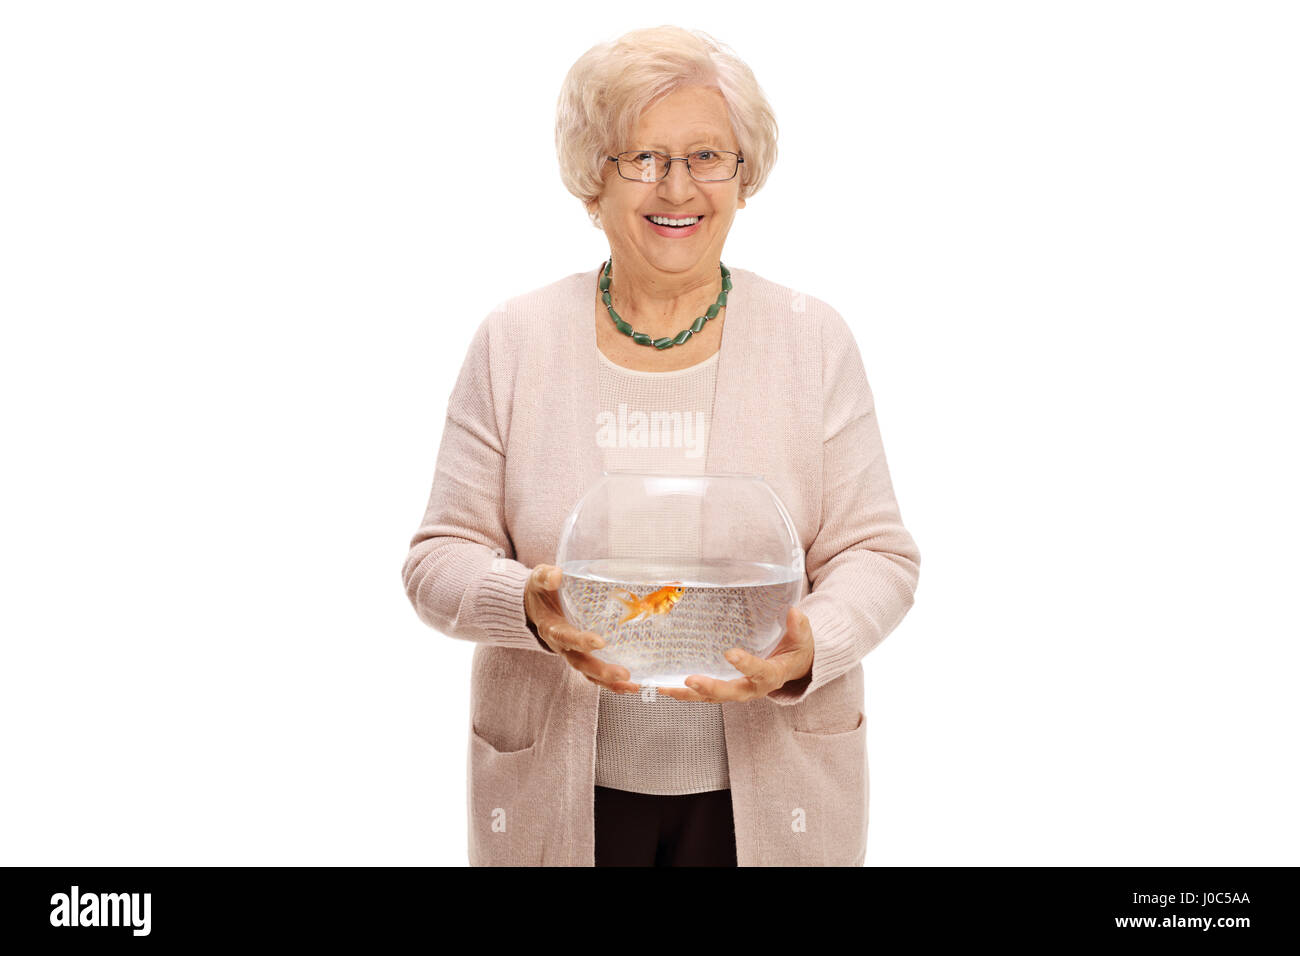 Mature woman holding a bowl with a goldfish inside and looking at the camera isolated on white background Stock Photo